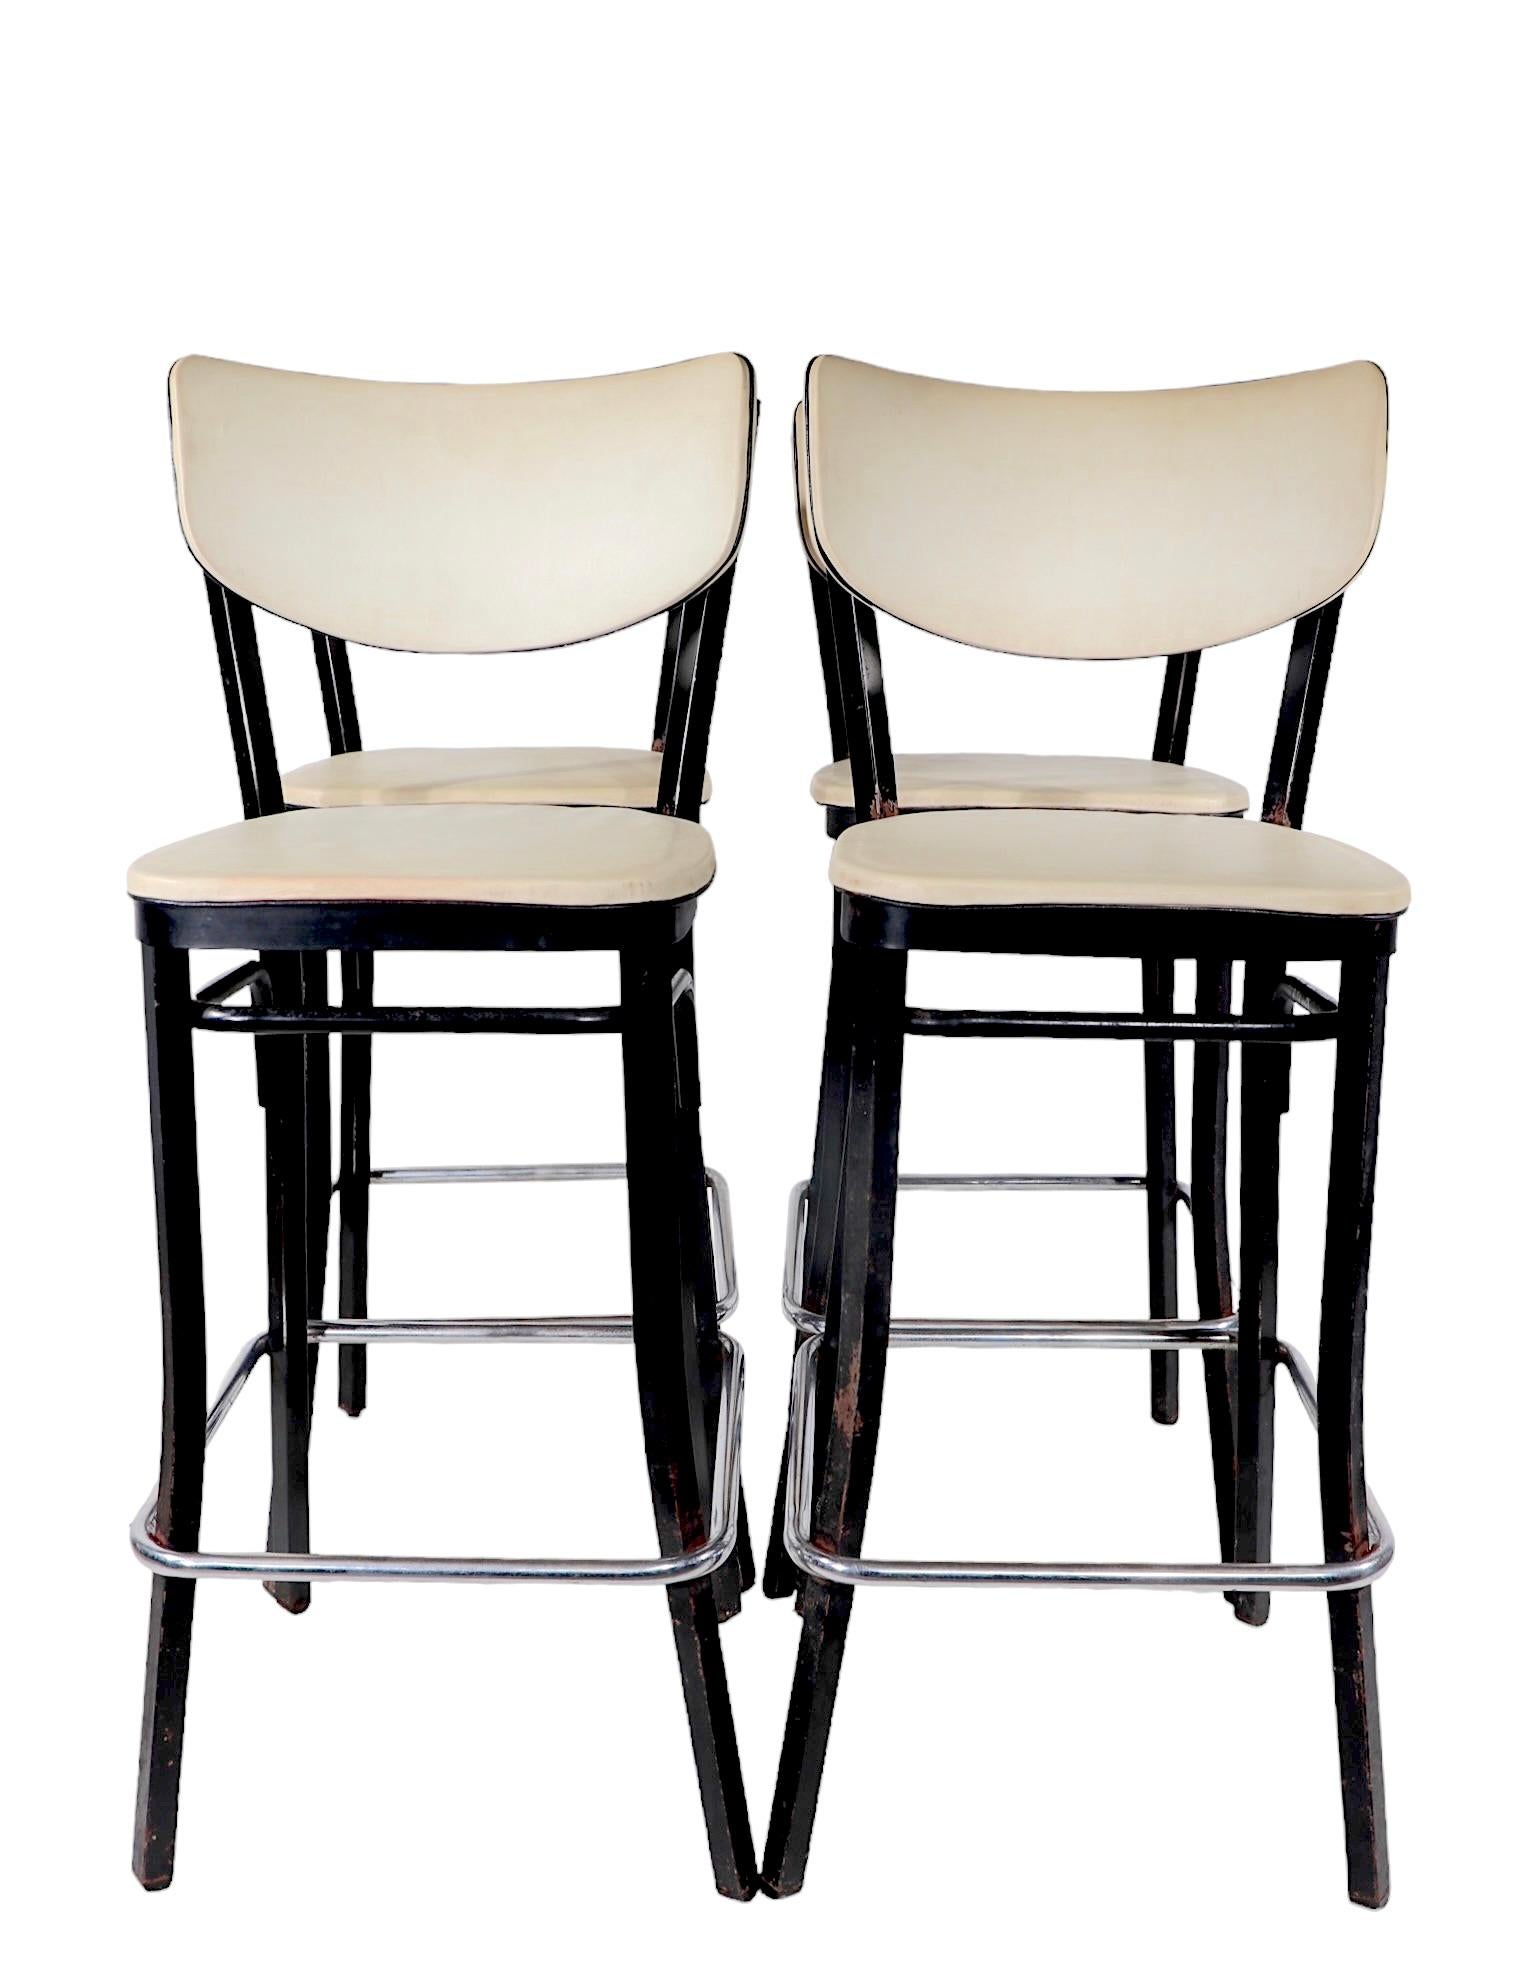 Set of Four Mid Century Bar Stools by Finer Chrome Products Co. Inc. c 1950/1960 For Sale 4